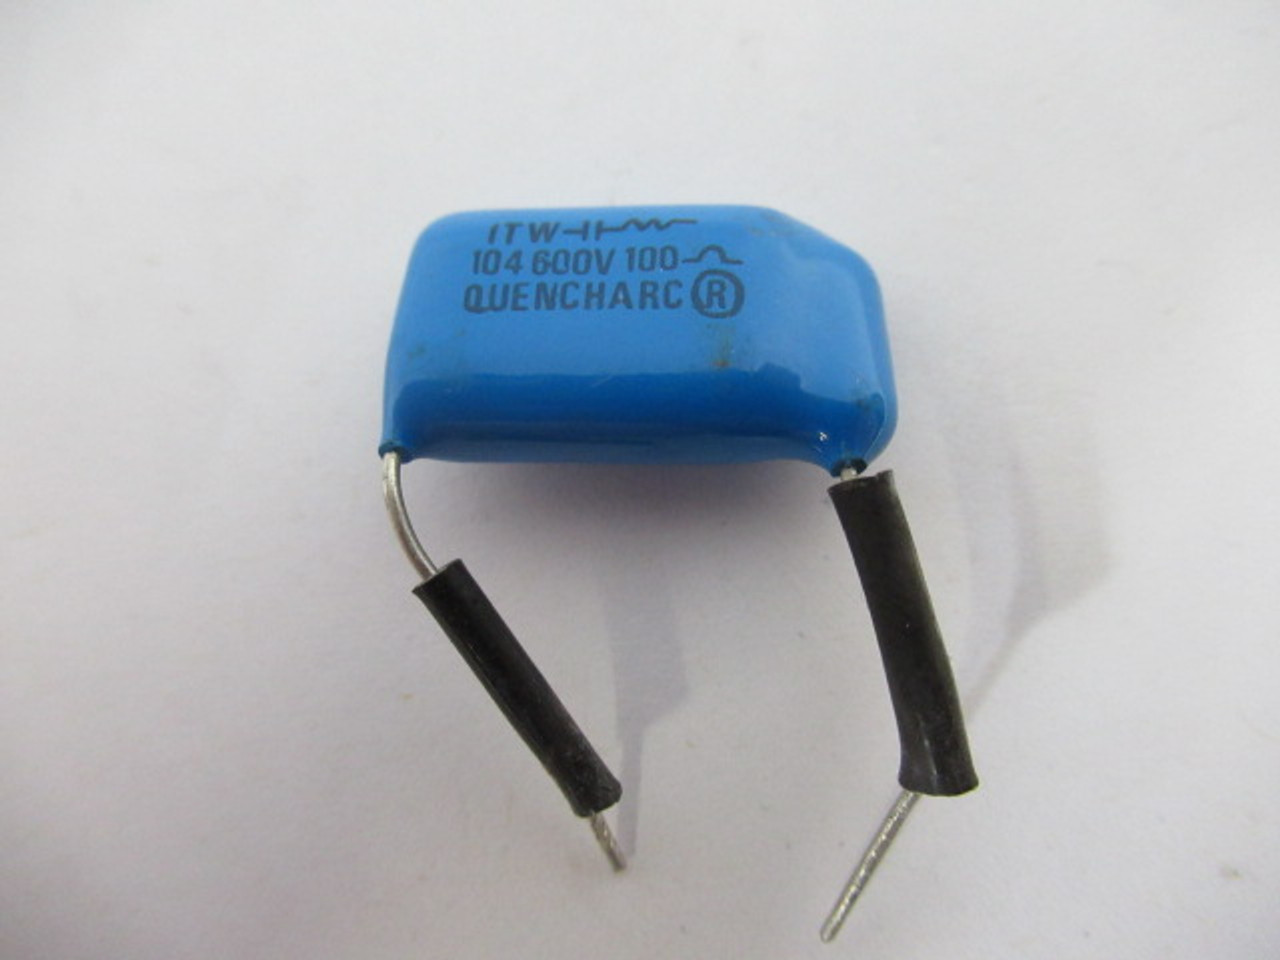 ITW 104M06QC100 Quencharc Arc Capacitor 10A 600VDC 250VAC 100Ohms 500mV USED